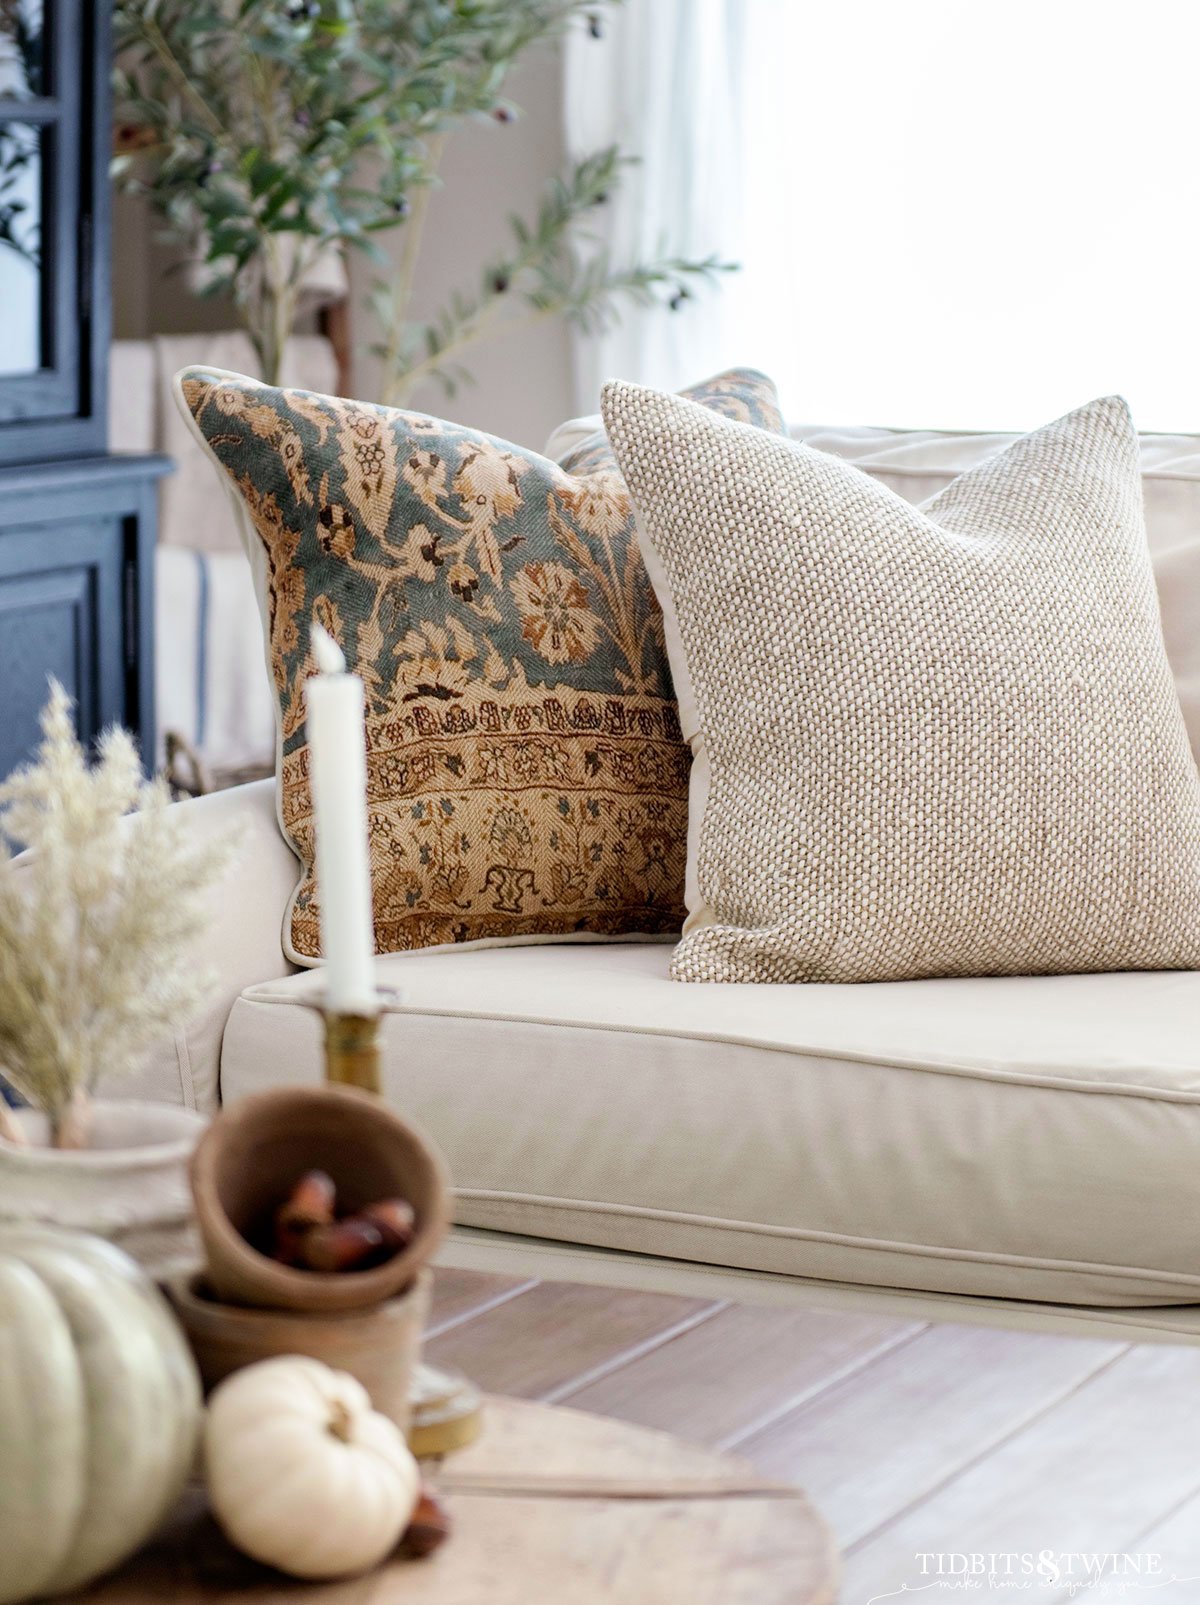 beige textured linen pillow in front of blue and terracotta patterned pillow on white slipcovered sofa in fall family room 